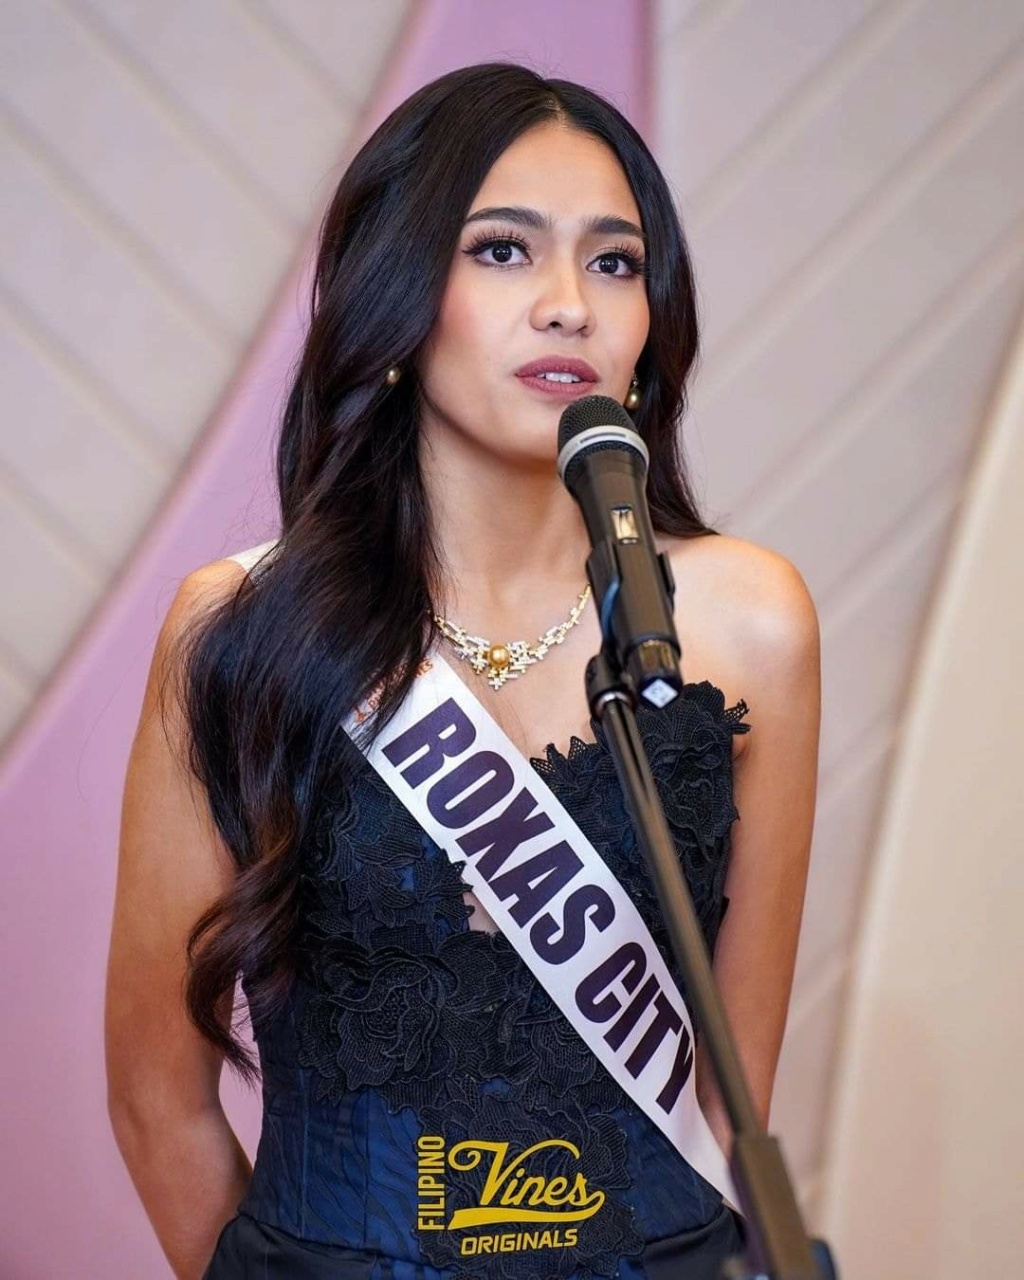 ROAD TO MISS UNIVERSE PHILIPPINES 2022 is is Miss Pasay, Celeste Cortesi - Page 9 Fb_22187